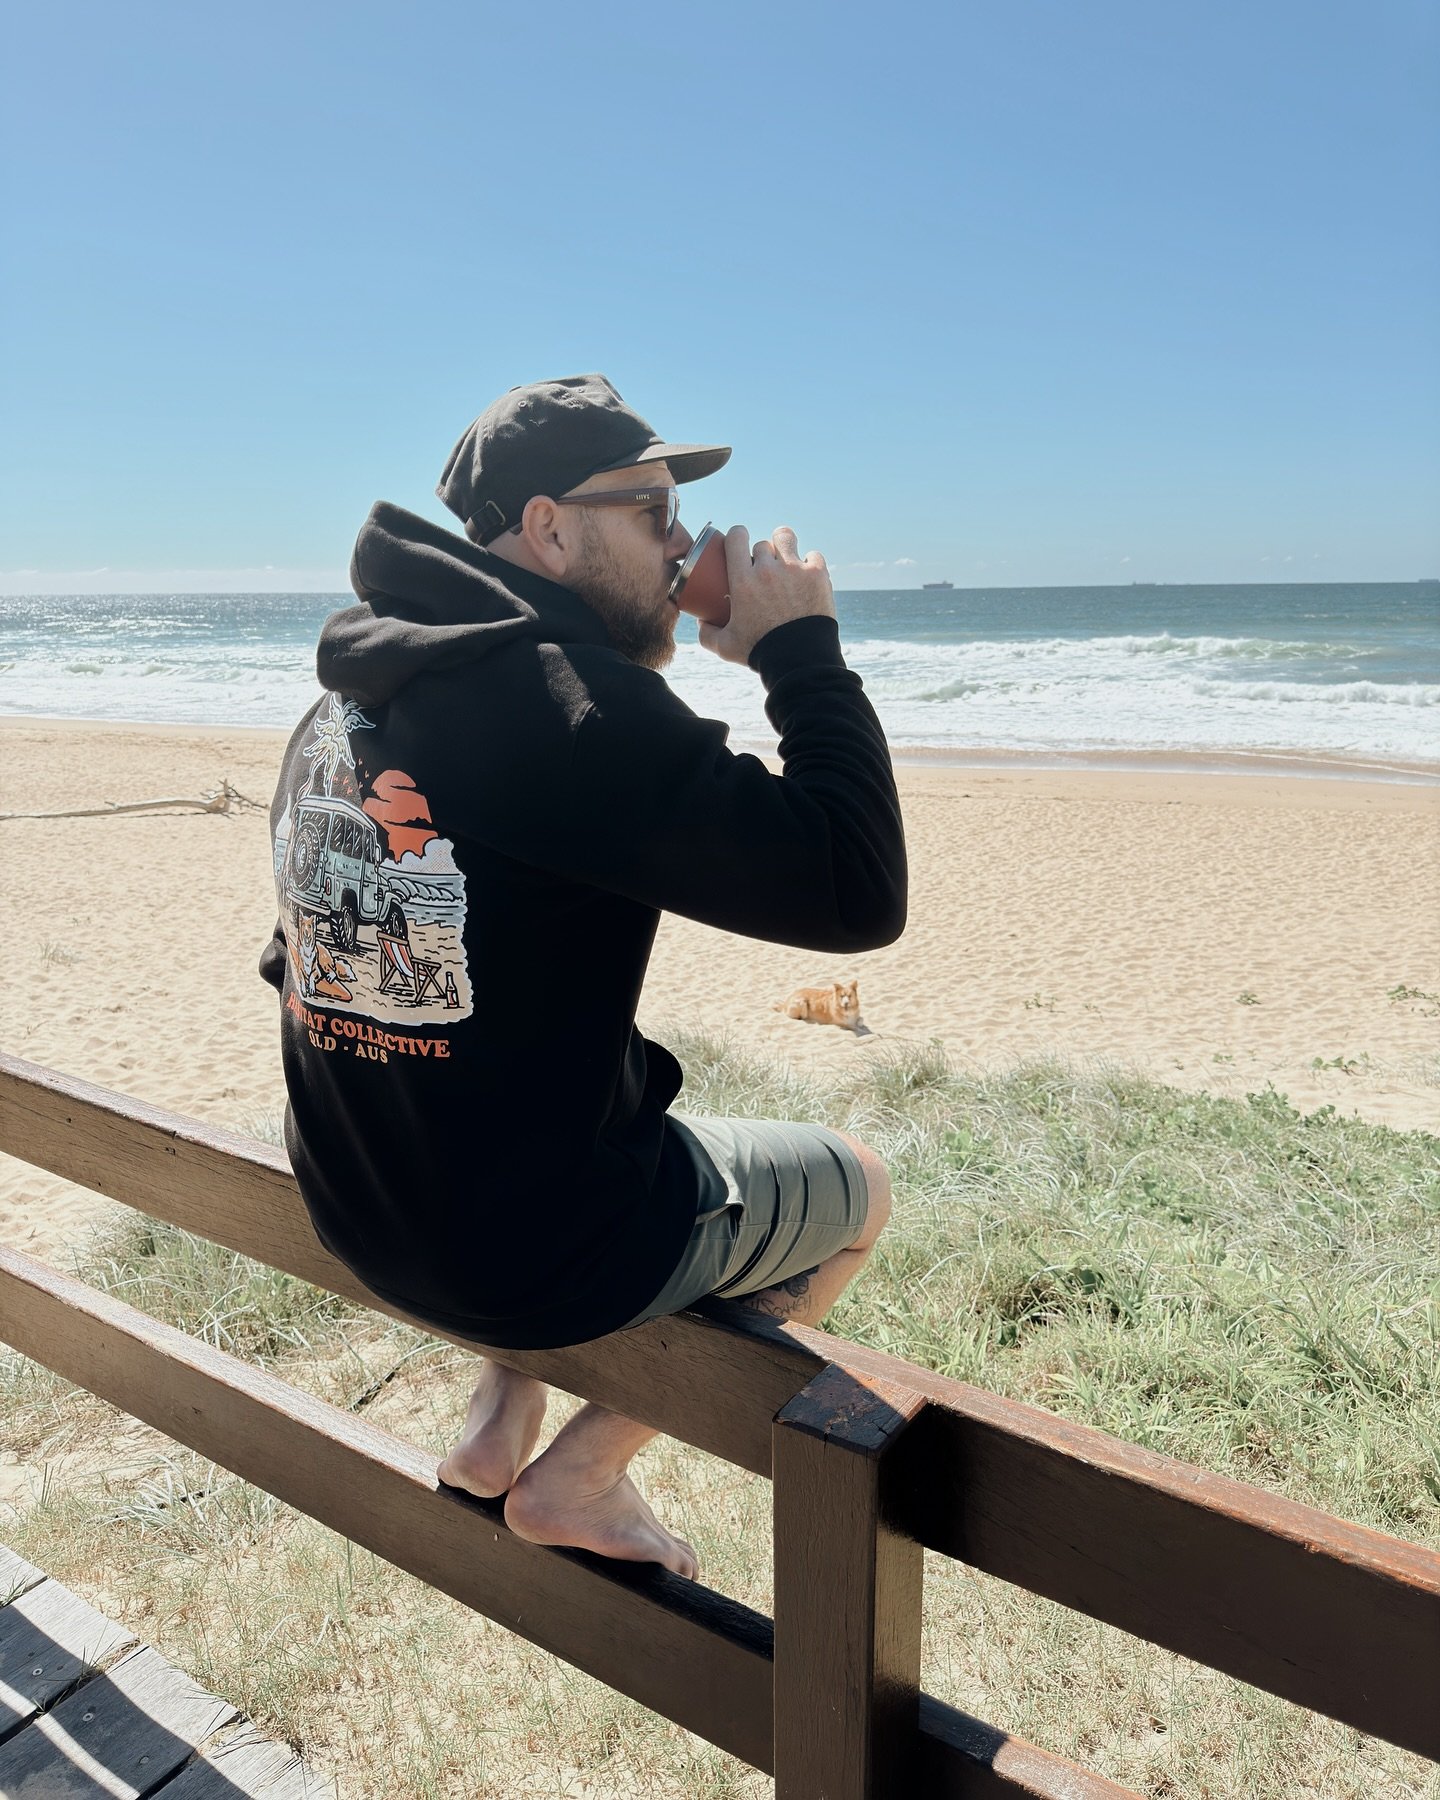 Mid-morning surf check with our favourite Winston hoodie🌊 NOW AVAILABLE FOR PREORDER for a limited time so get in quick! 

-
#hoodie #hoodies #winterapparel #jumpers #thehabitatcollective #australianfashion #sunshinecoast